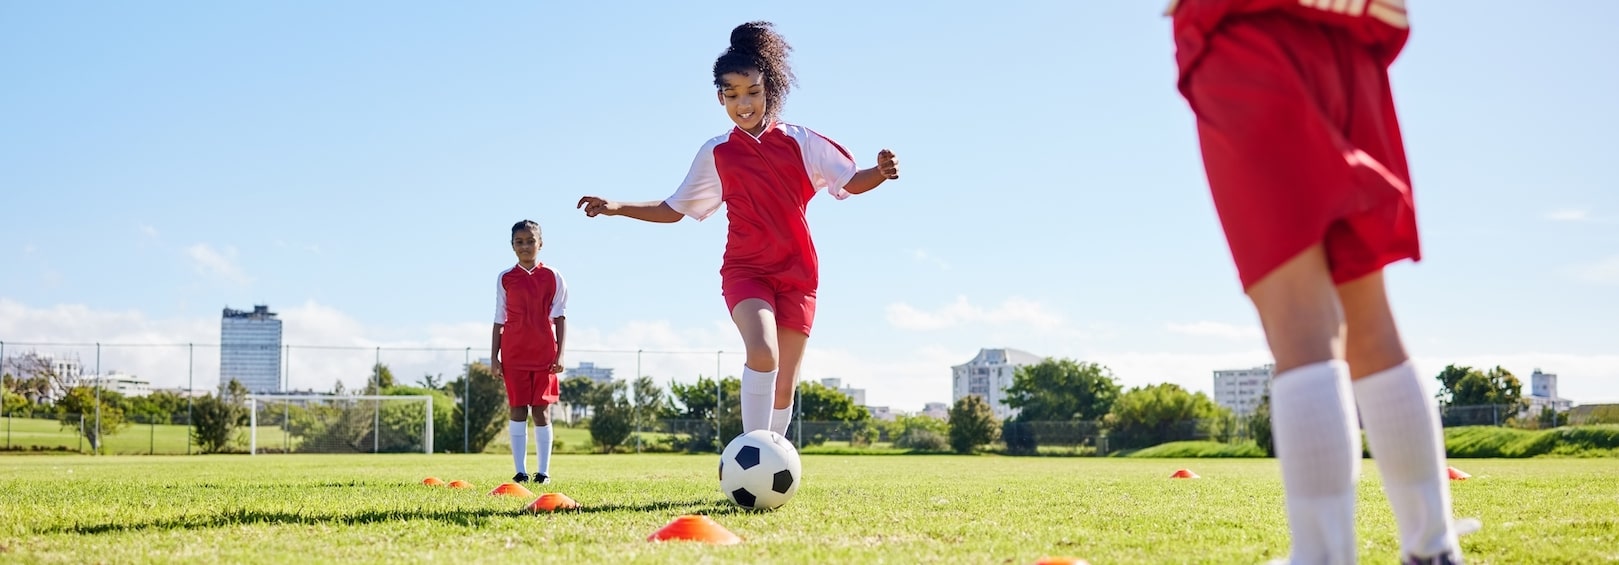 Unlock Your Soccer Skills with These Essential Drills for Girls